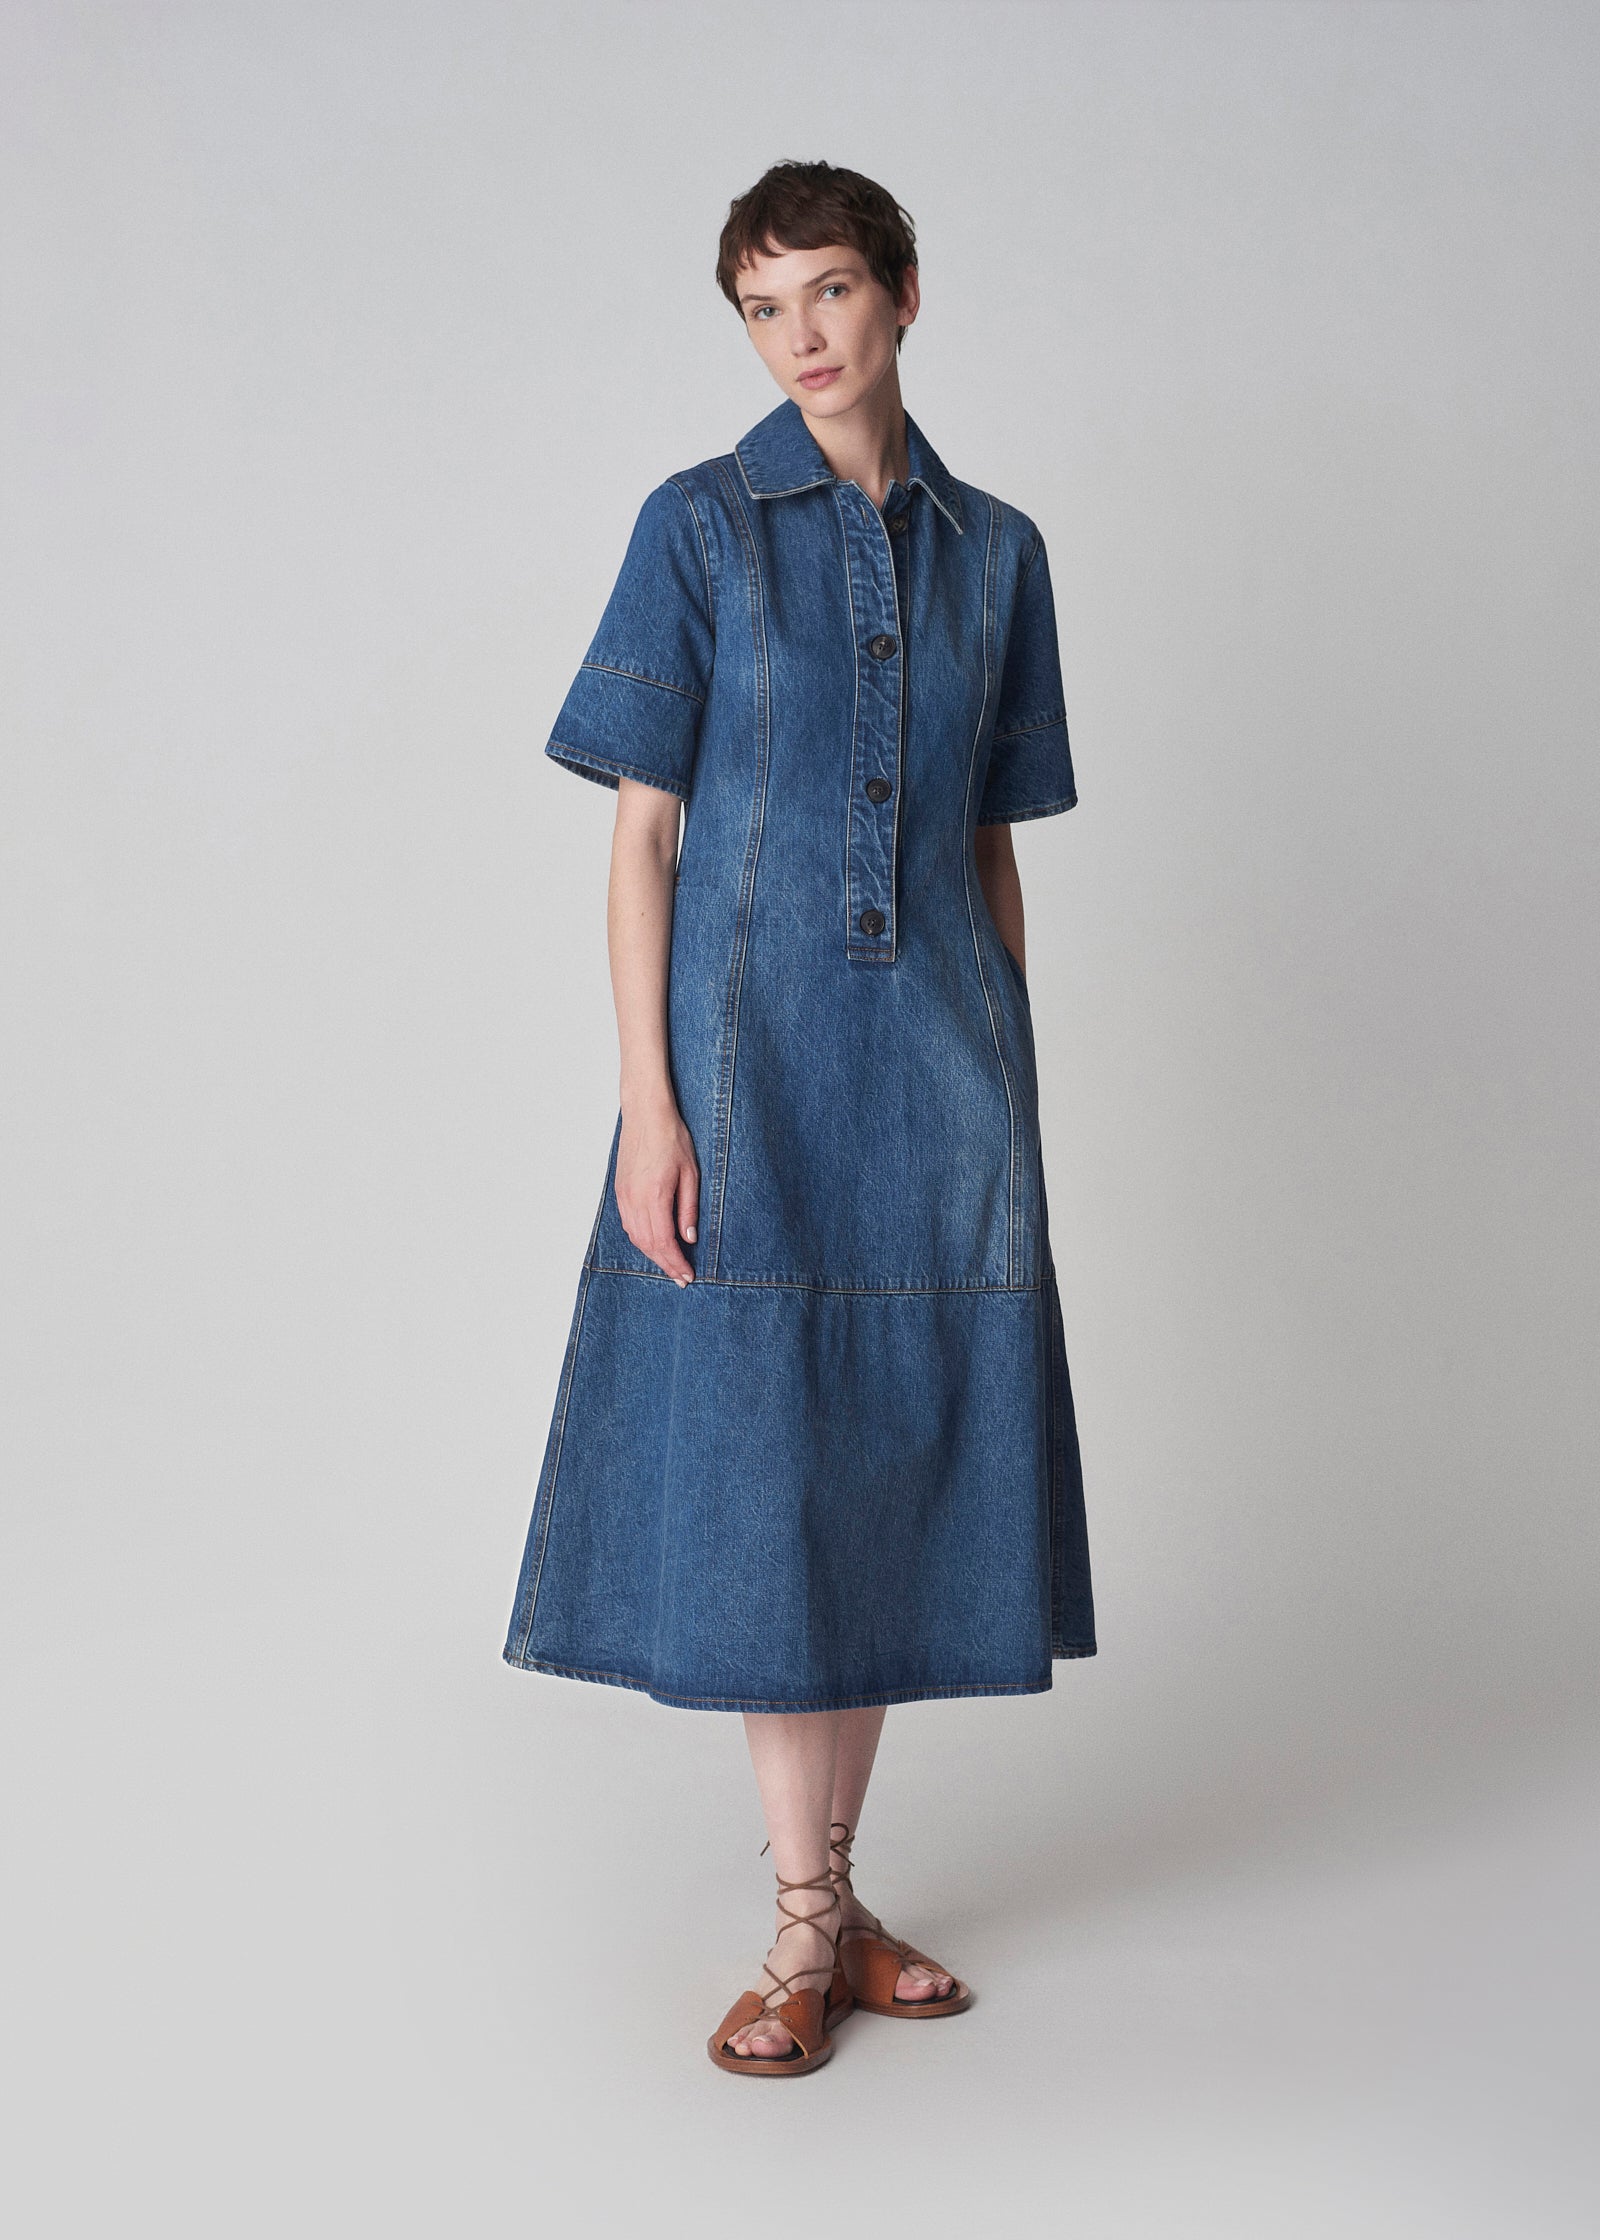 WRAPAROUND DENIM LOOK DRESS @ ₹420 ONLY FREE SHIPPING !* || Sizes  Available: S34 M36 L38 XL40 XXL42 3XL44 bust sizes || Length: 38 inches… |  Instagram